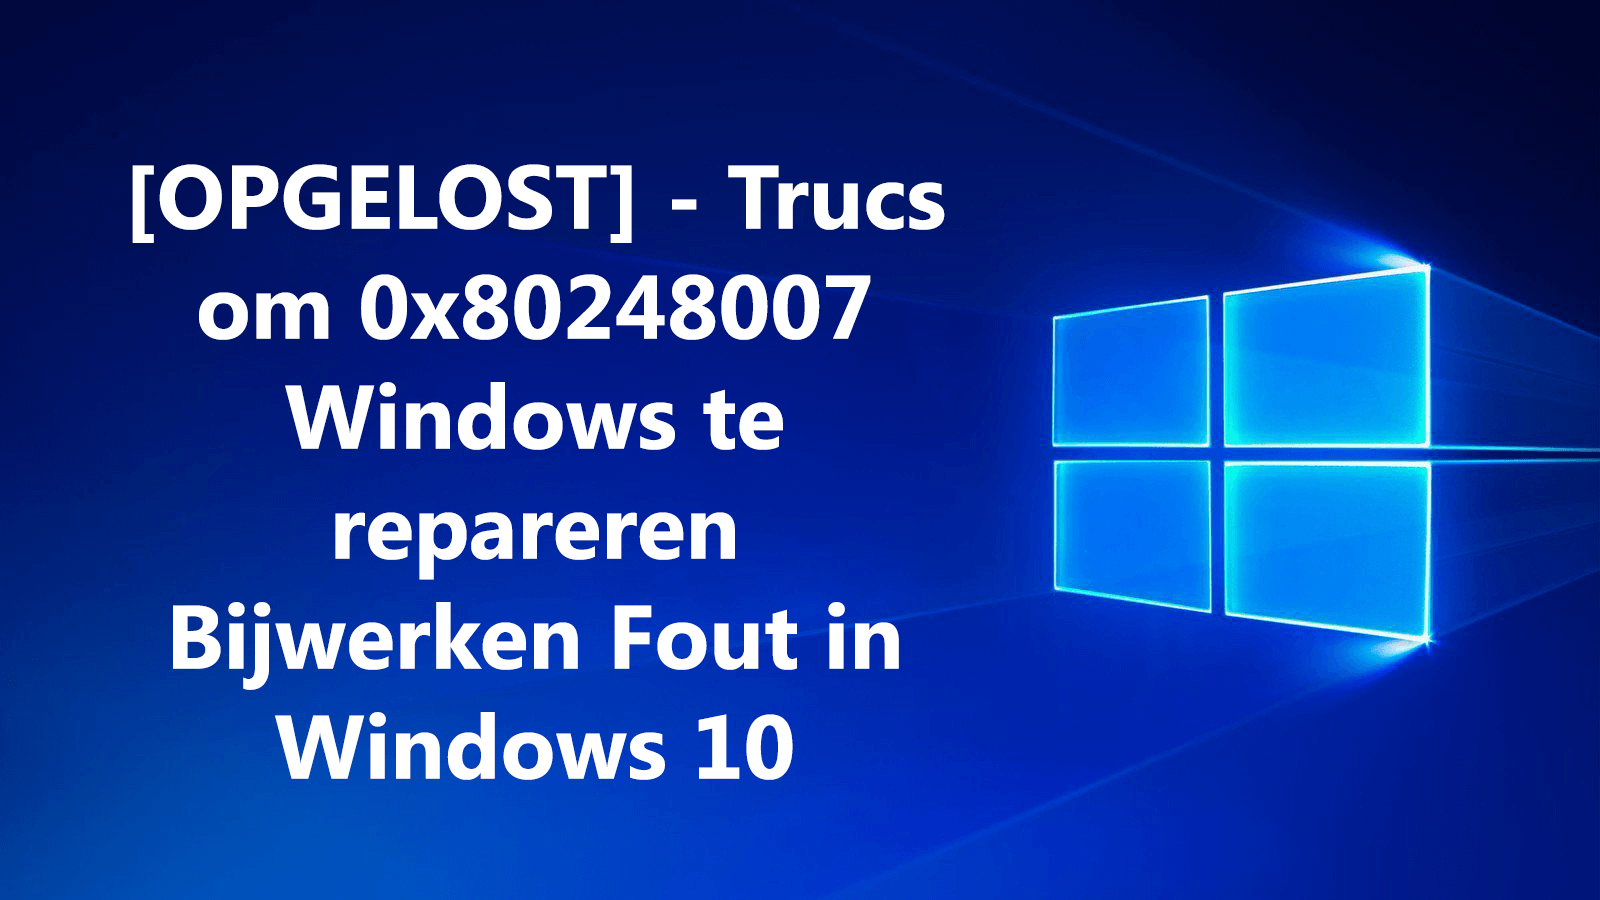 fout 0x80248007 in Windows 10